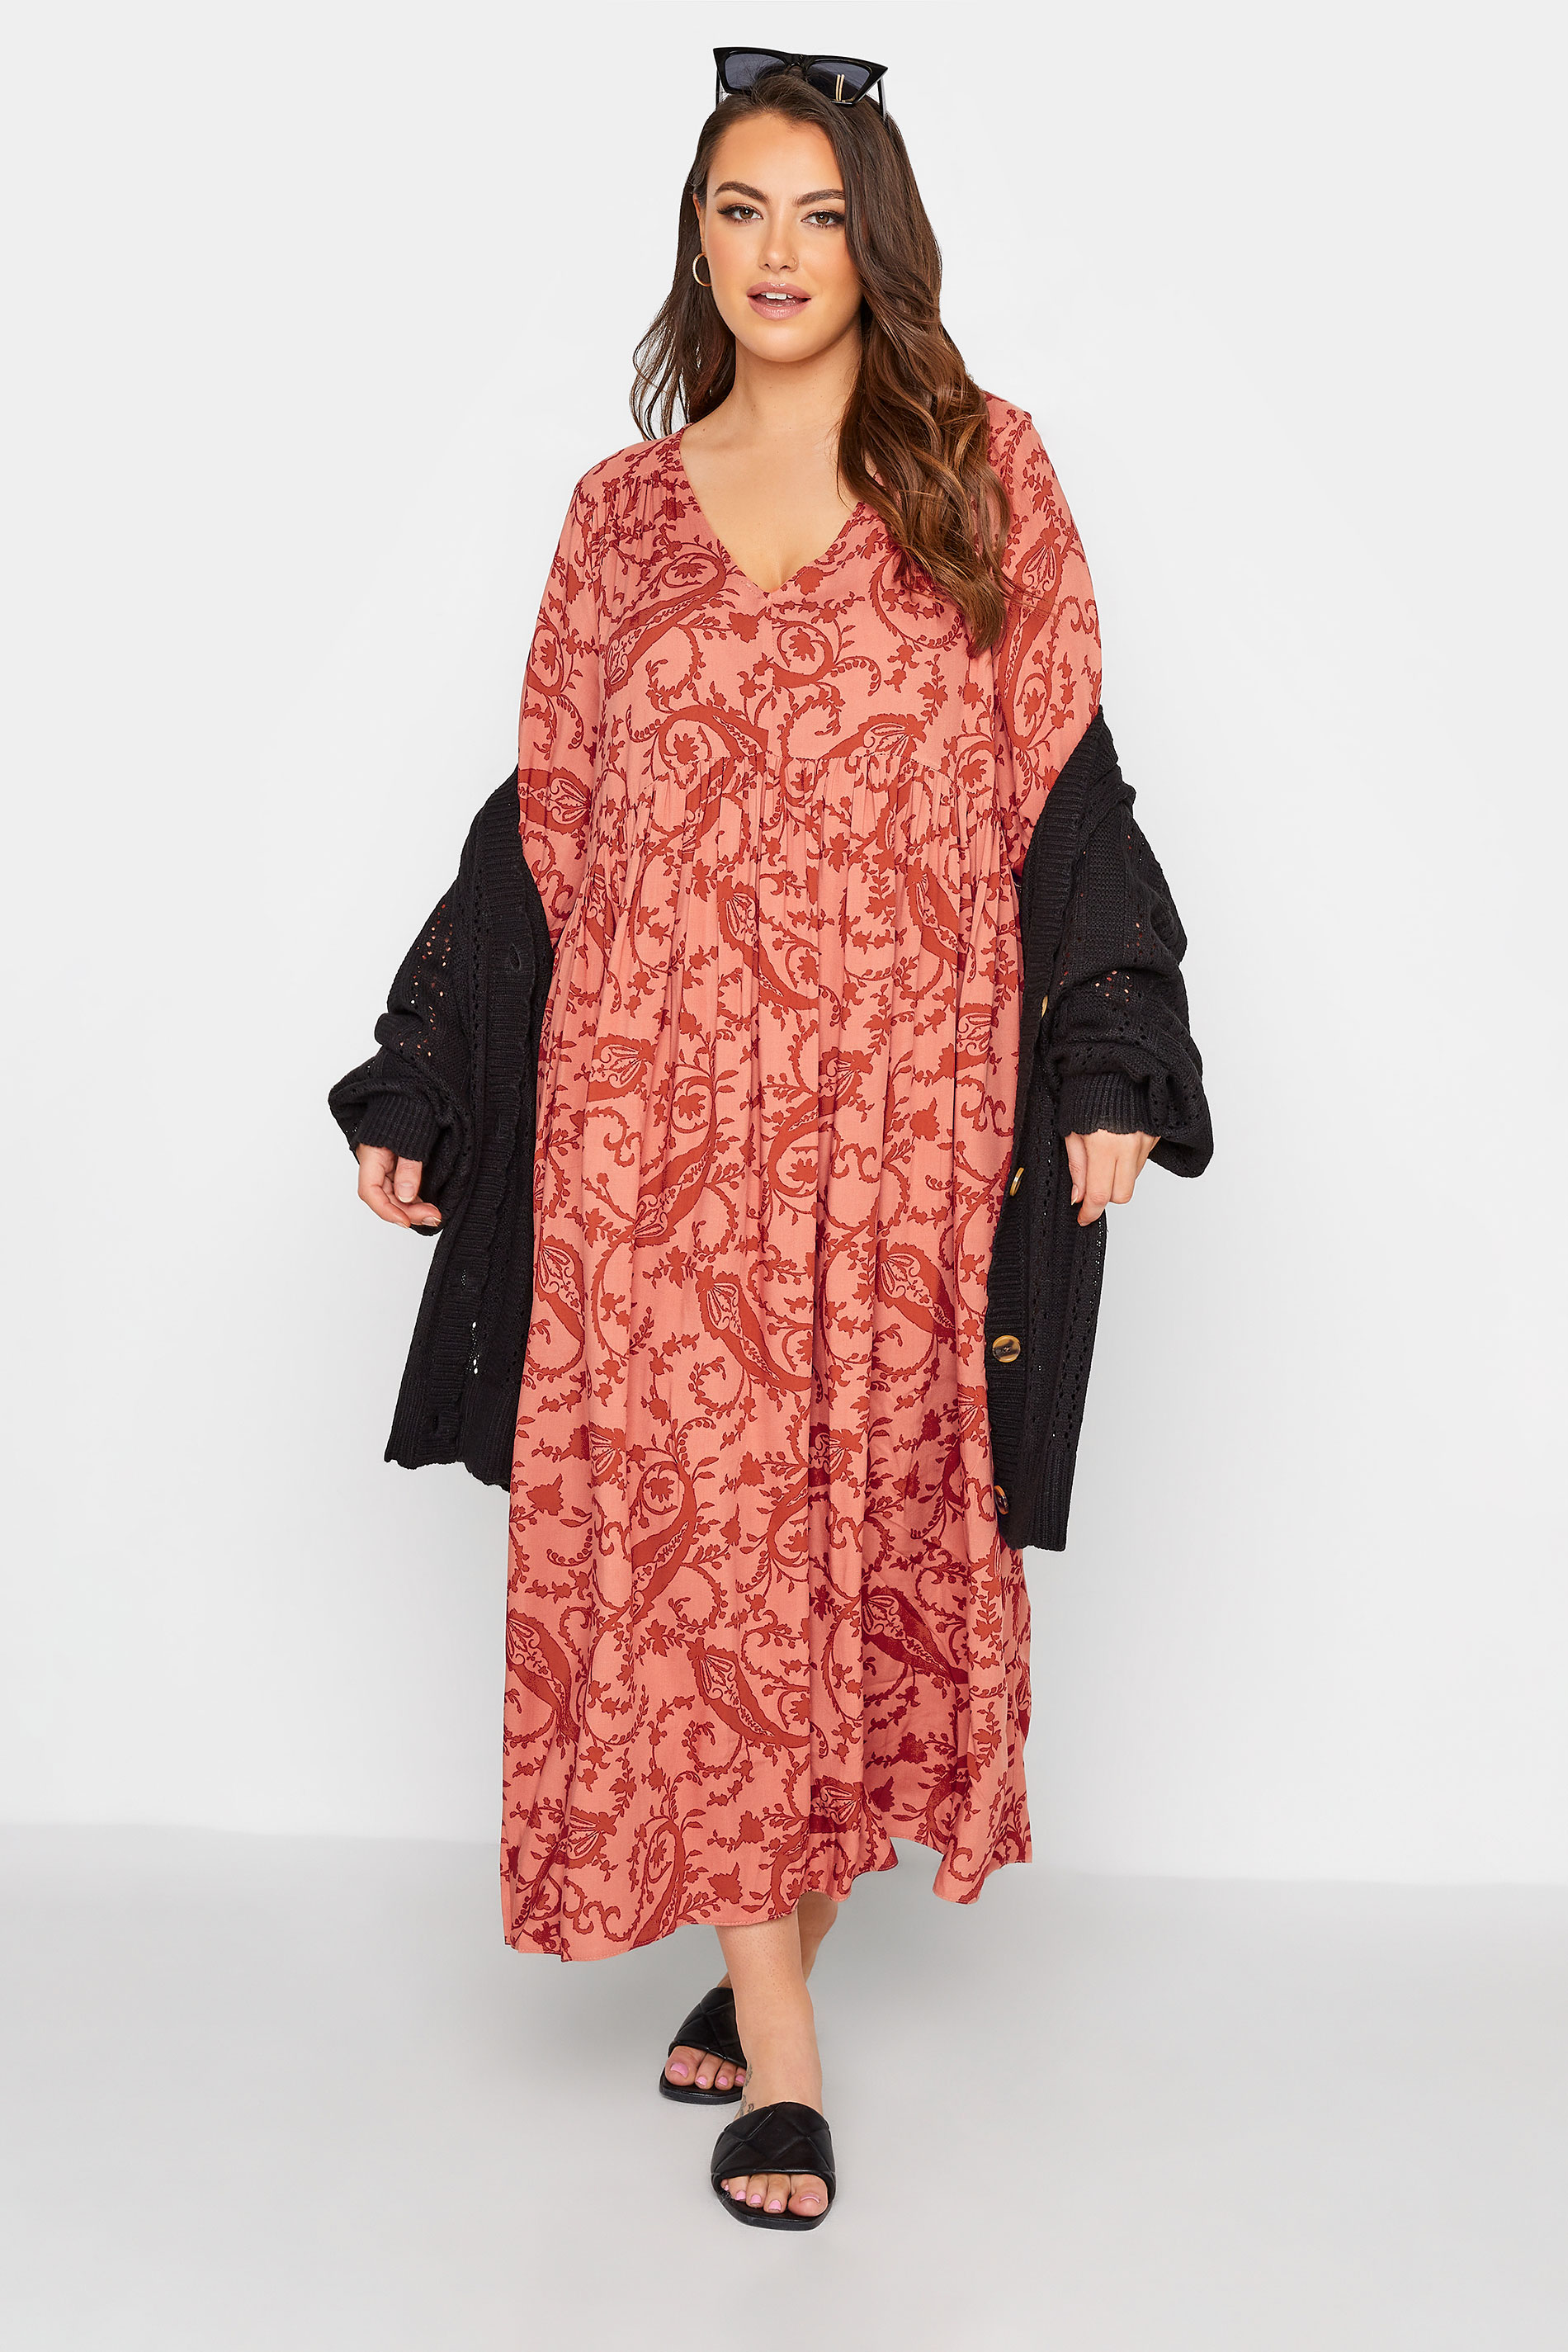 Robes Grande Taille Grande taille  Robes Longues | THE LIMITED EDIT - Robe Rose Bohème Imprimé Paisley - AG85592